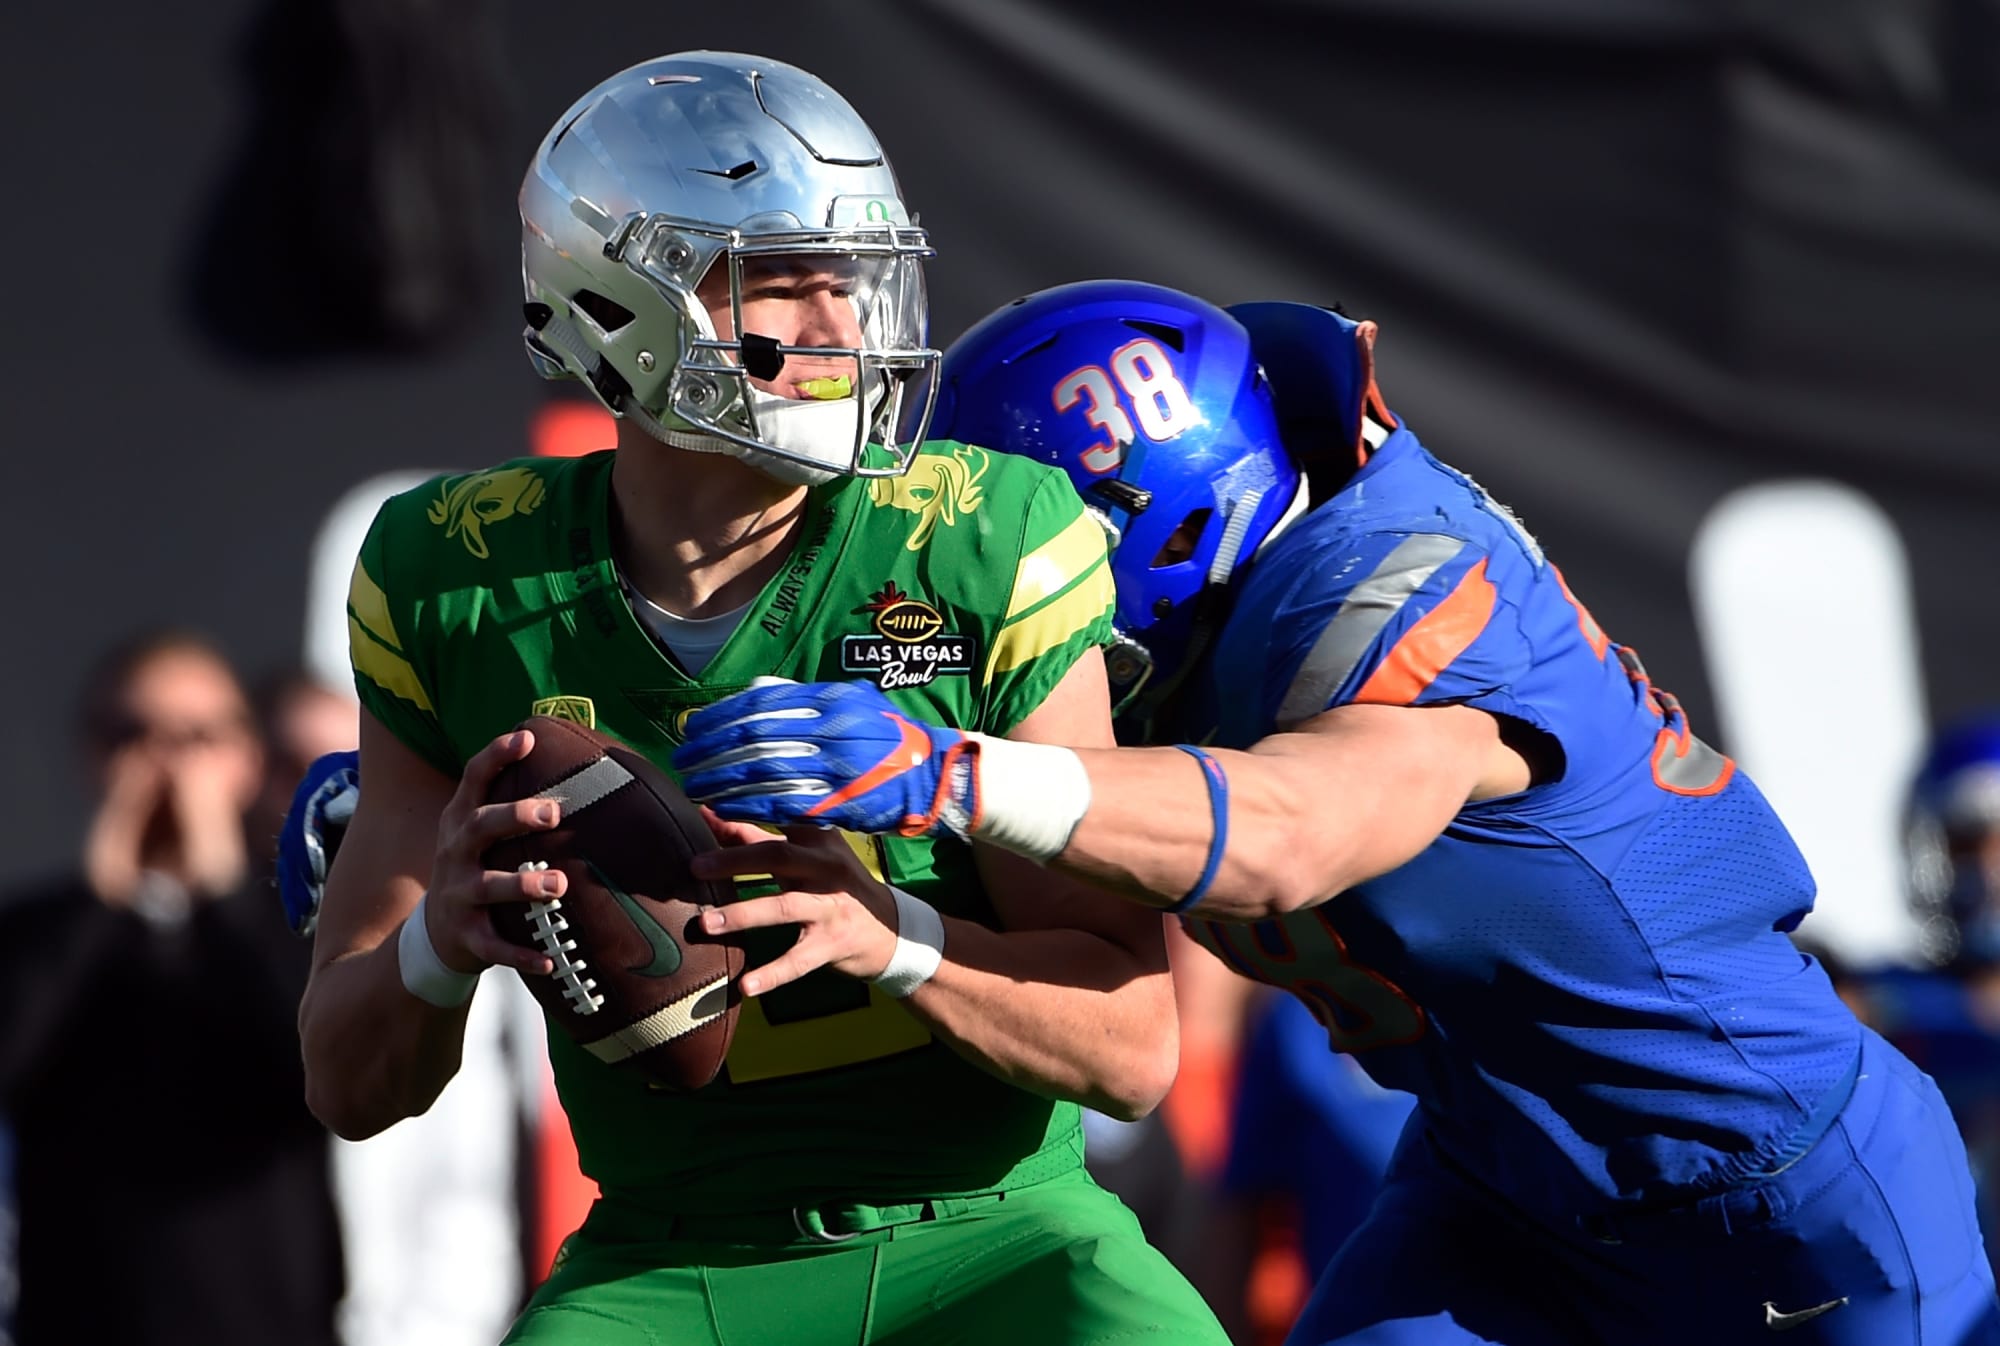 PHOTOS: Oregon Is Wearing Ridiculously Bright All-Yellow Uniforms